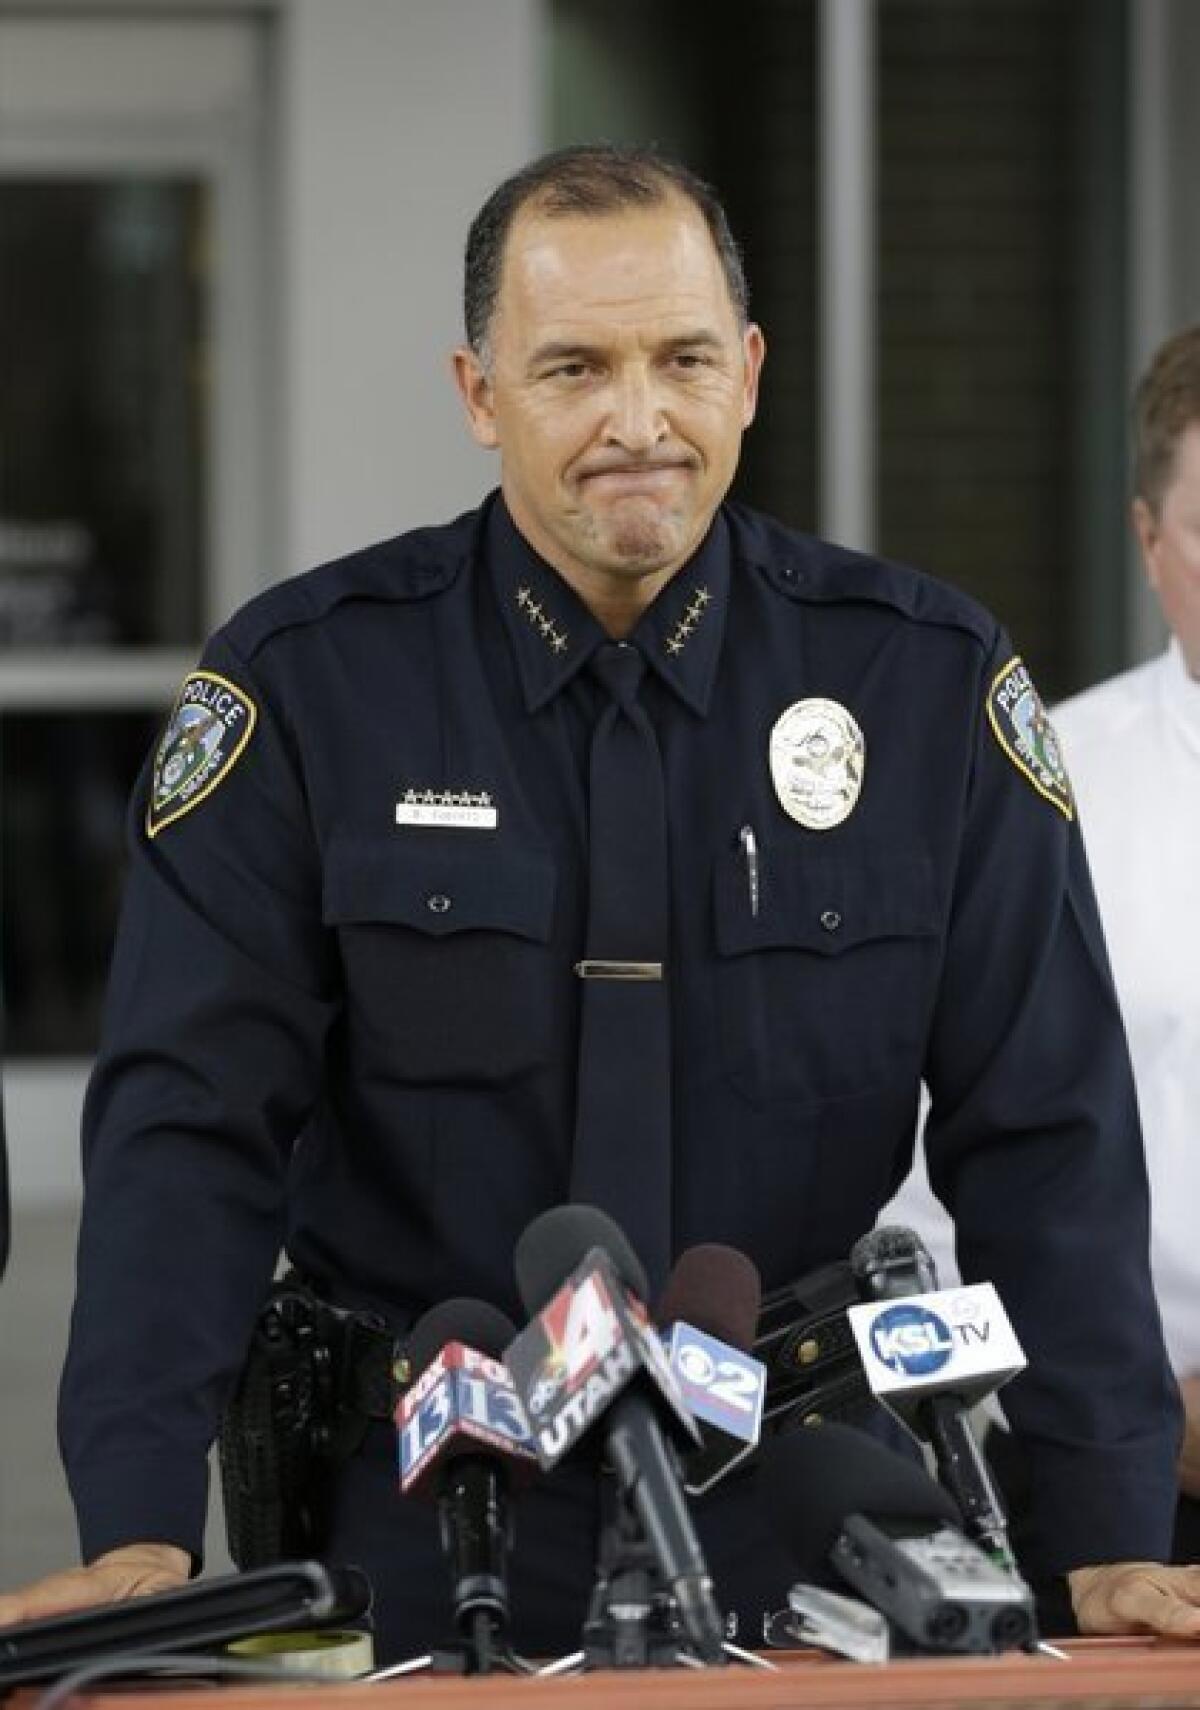 Police Chief Bryan Roberts speaks at a news conference, in Draper, Utah, about the fatal shooting Sunday of the city's police officers.